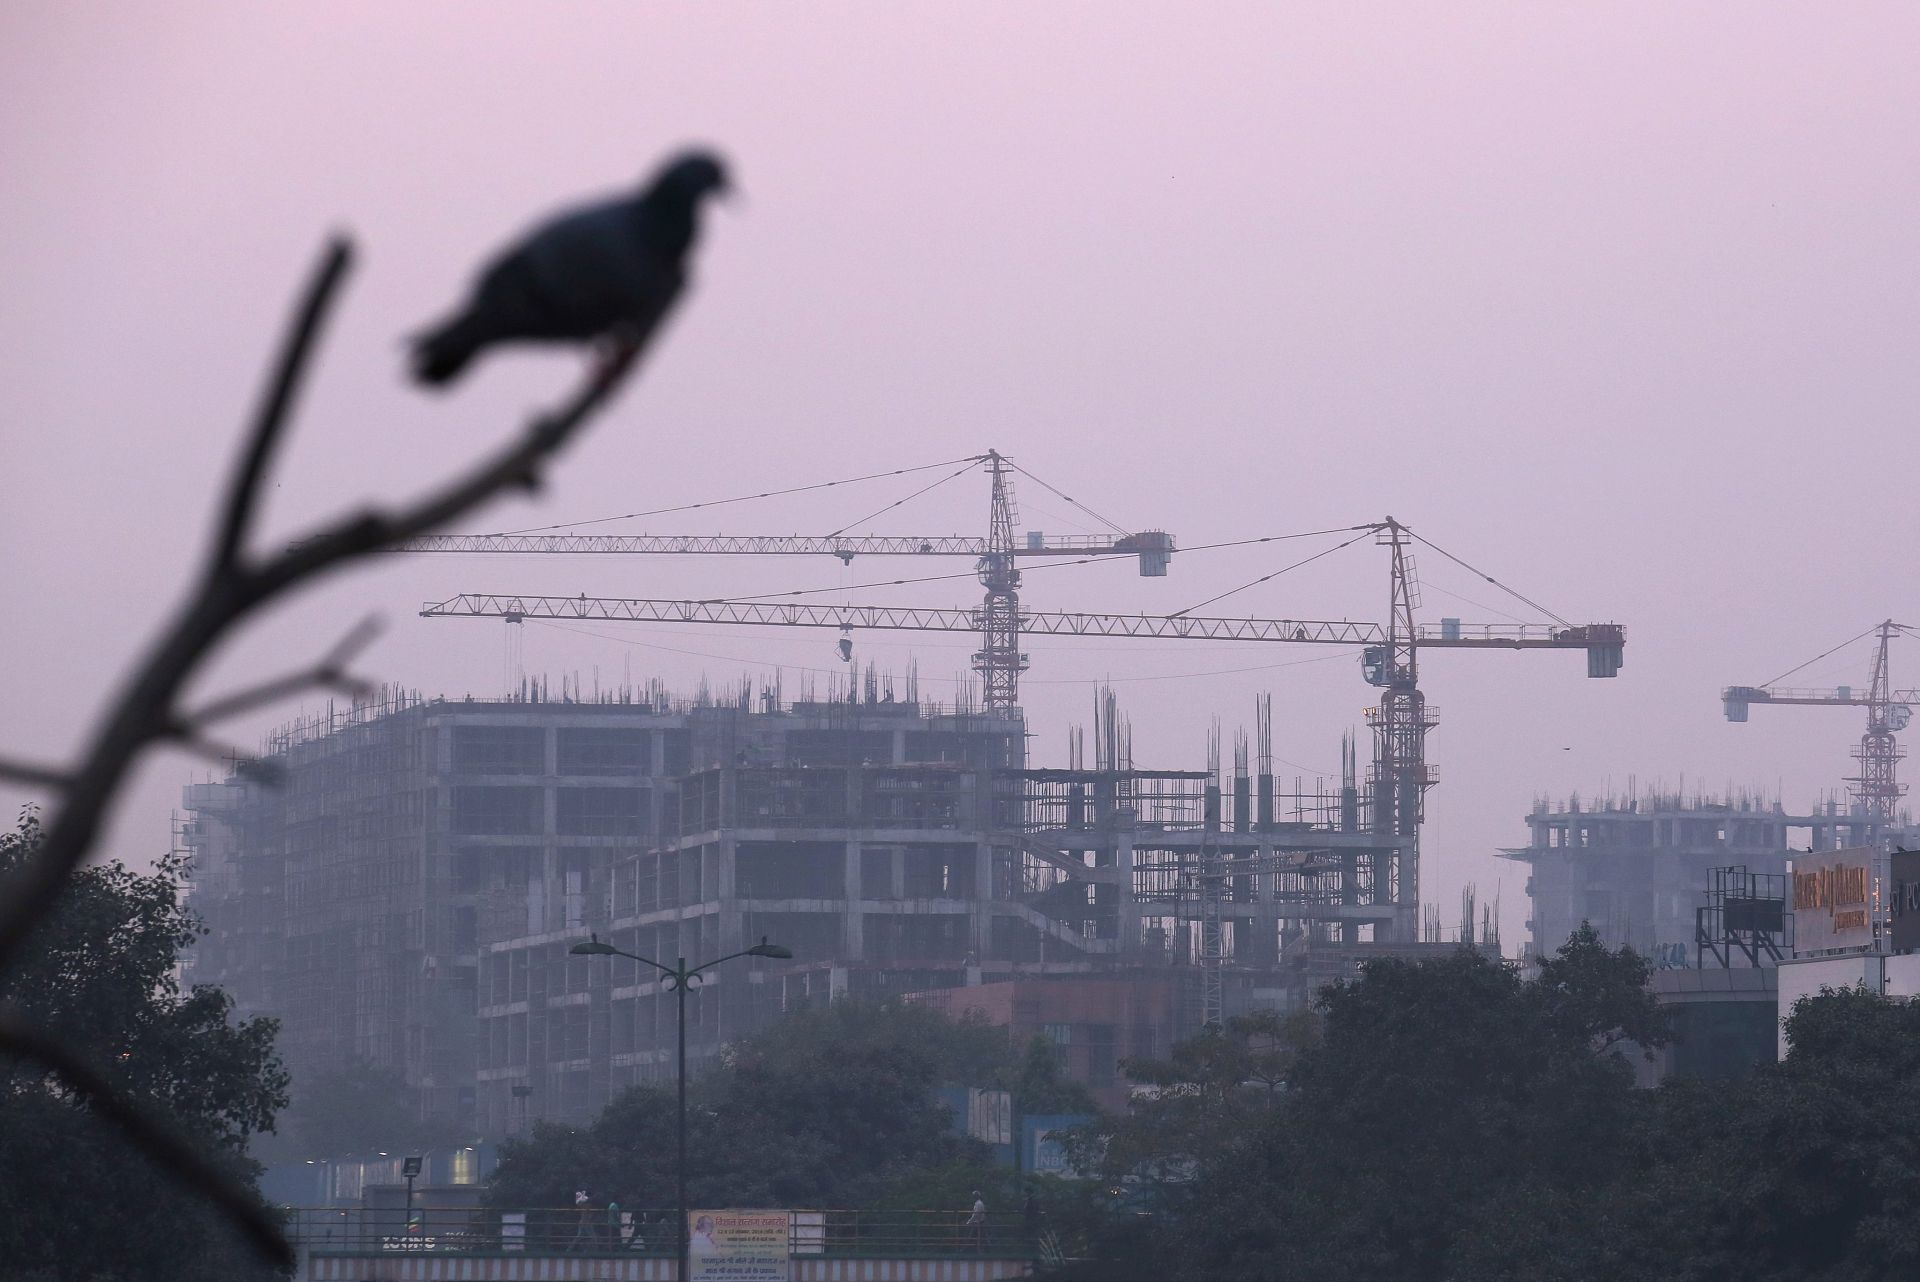 epa05638153 A general view of a construction site in New Delhi, India, 19 November 2016. According to news reports, environment and health authorities in India are becoming more concerned about a new air pollutant, known as Particulate Matter 1 (PM1), which are particles finer than the thickness of a human hair and suspended in air. These pollutants are primarily caused by vehicles, factories and construction sites.  EPA/RAJAT GUPTA